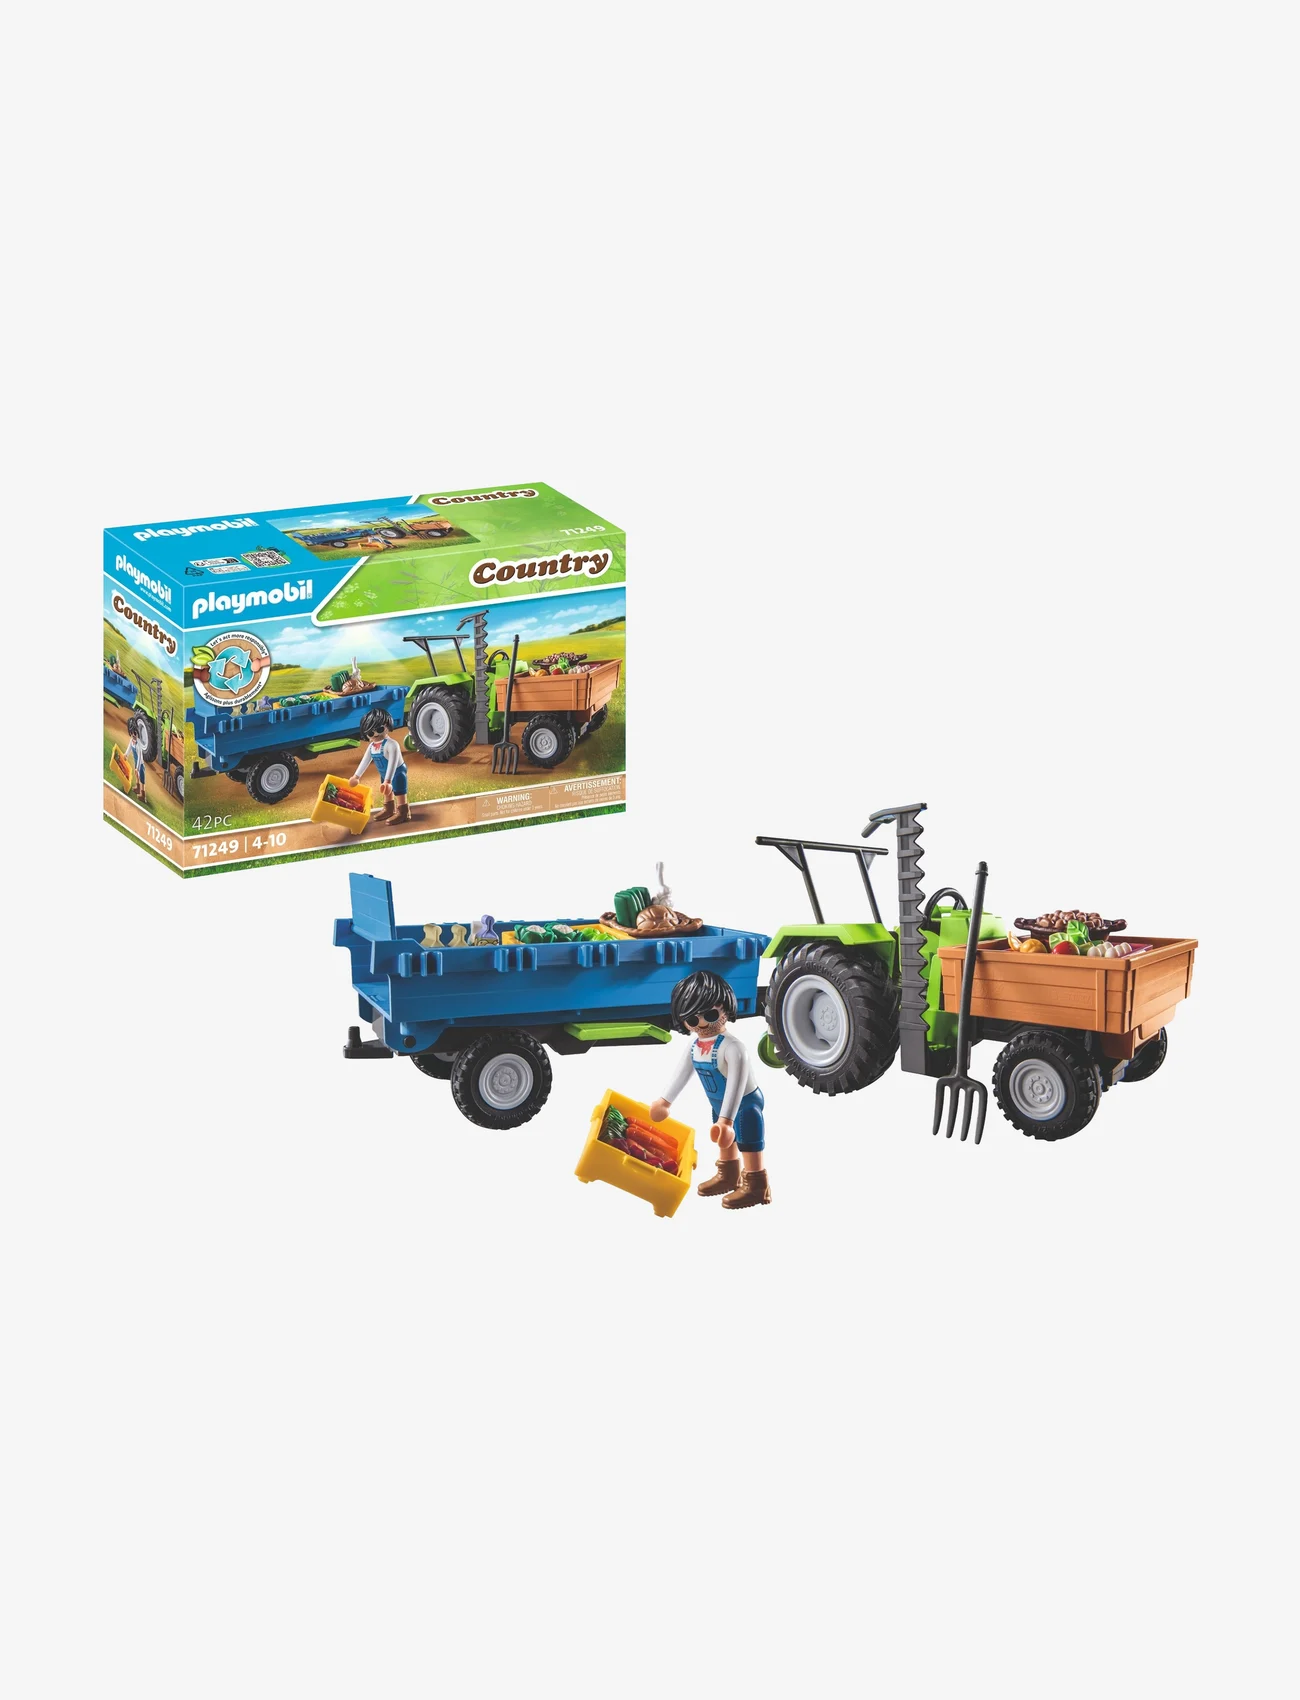 PLAYMOBIL - PLAYMOBIL Country Traktor med anhænger - 71249 - playmobil country - multicolored - 0